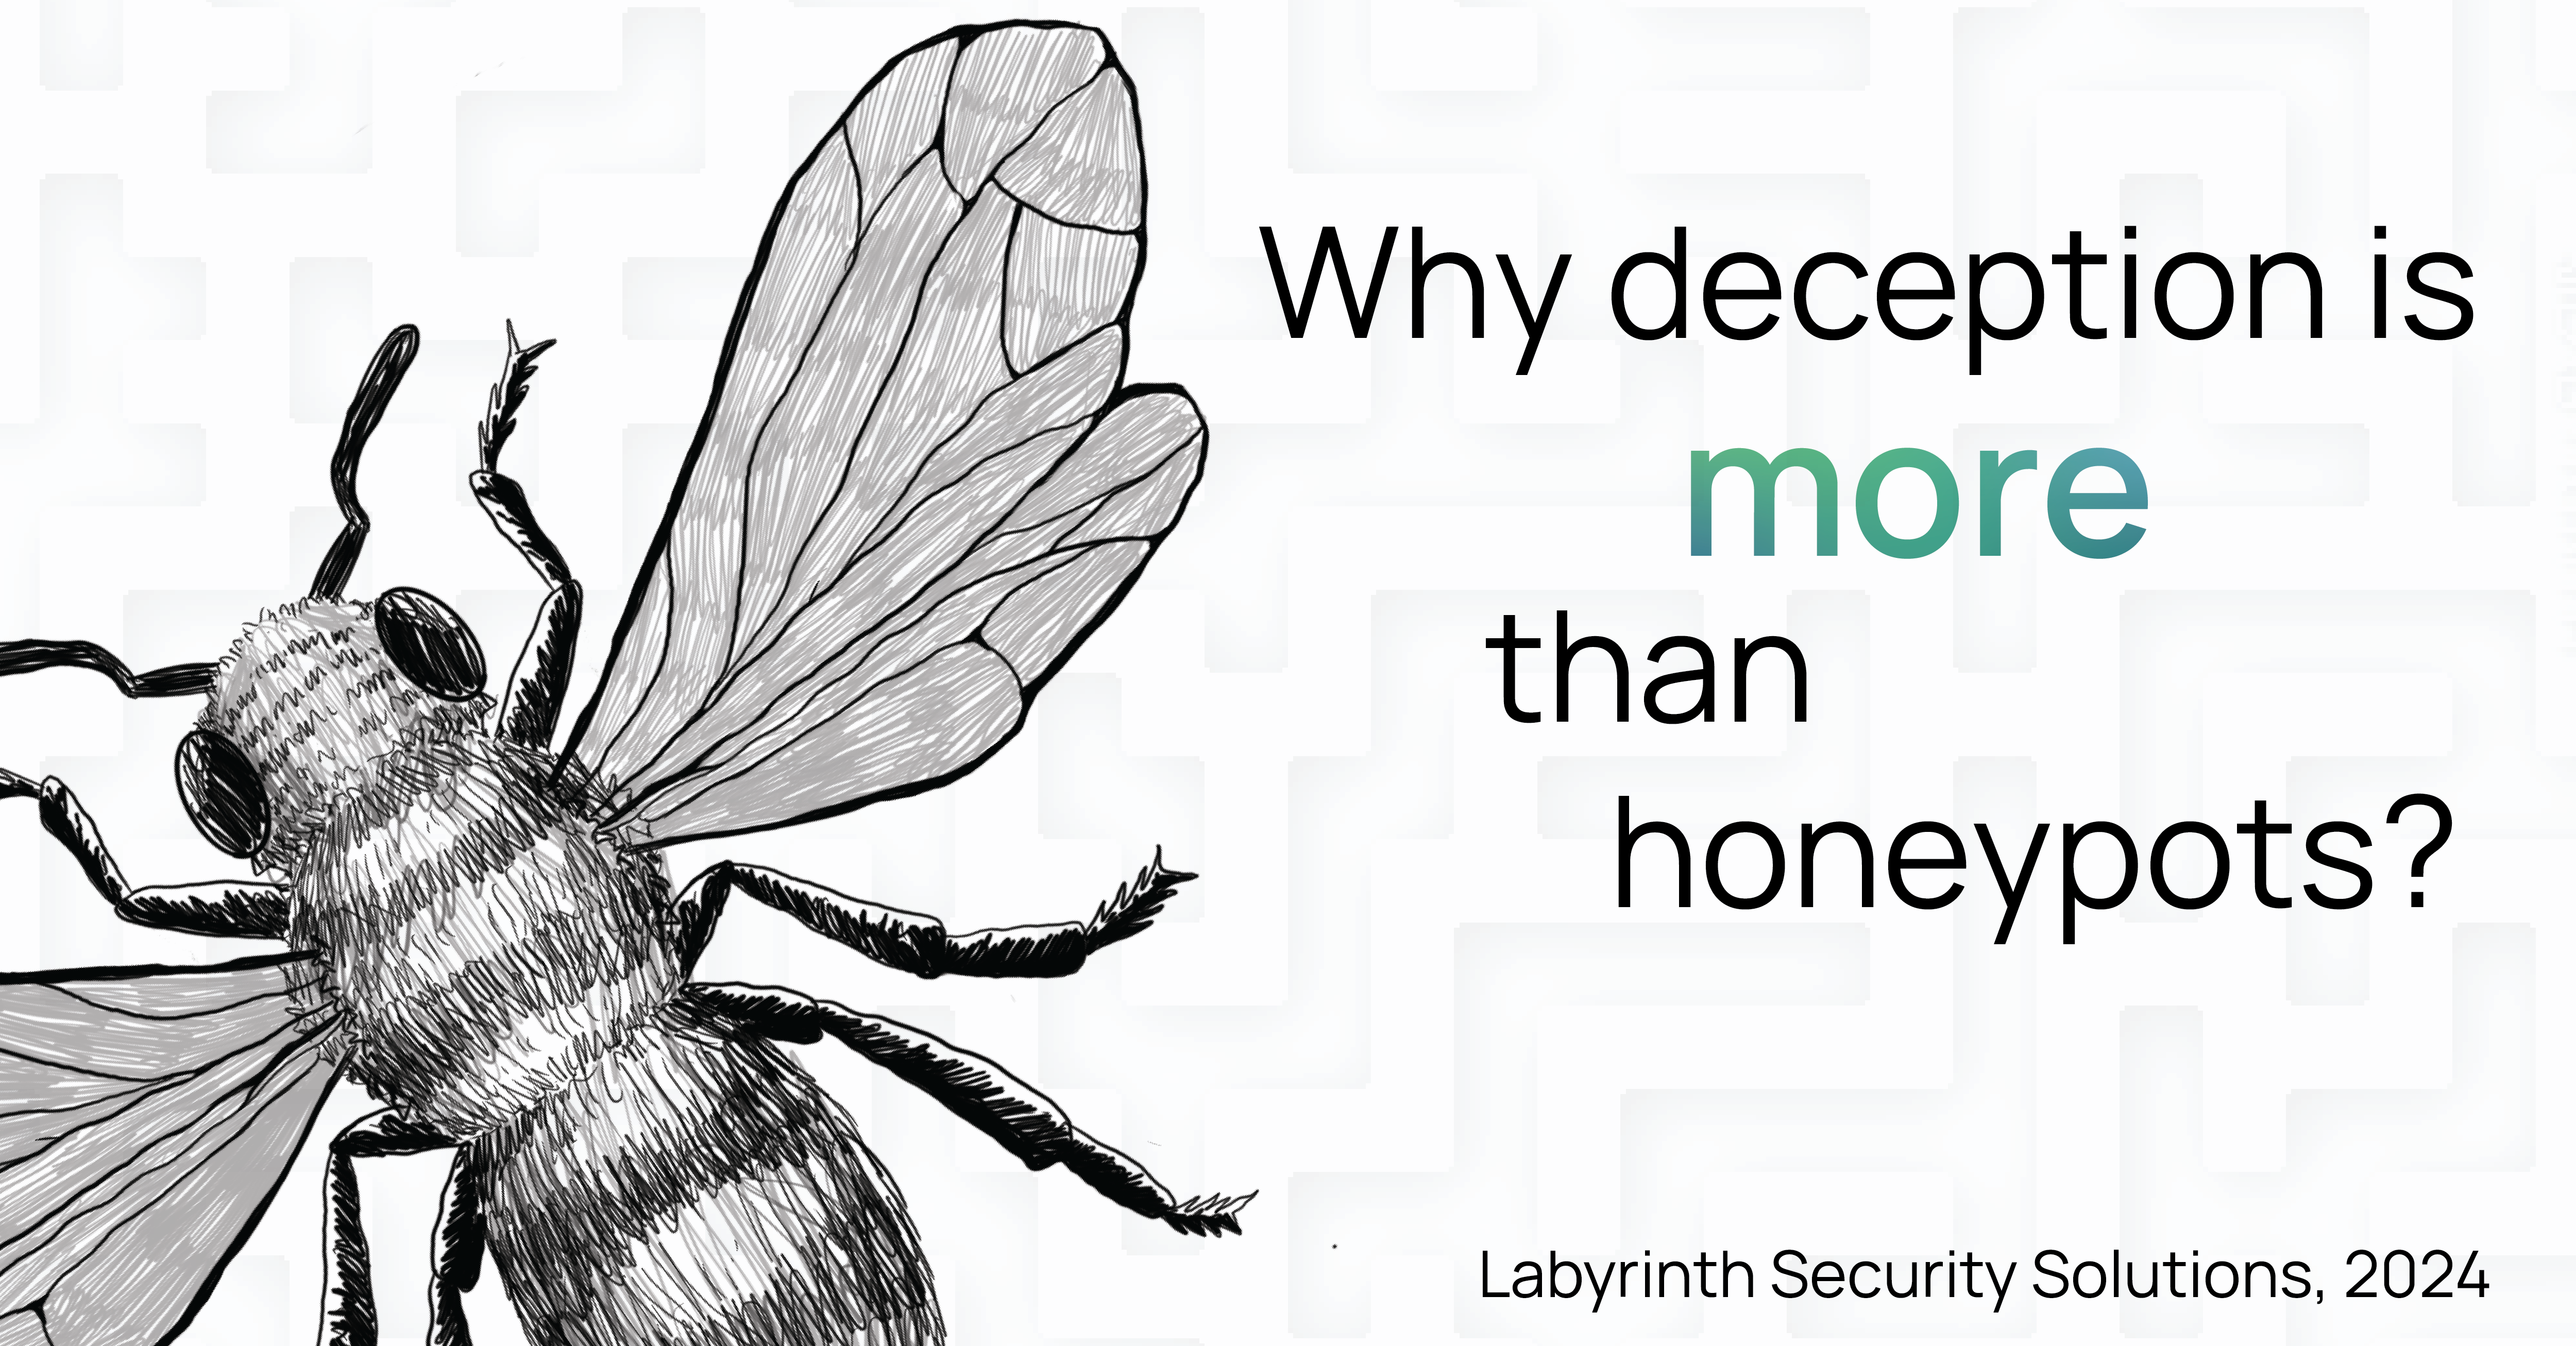 Why deception is more than honeypots?